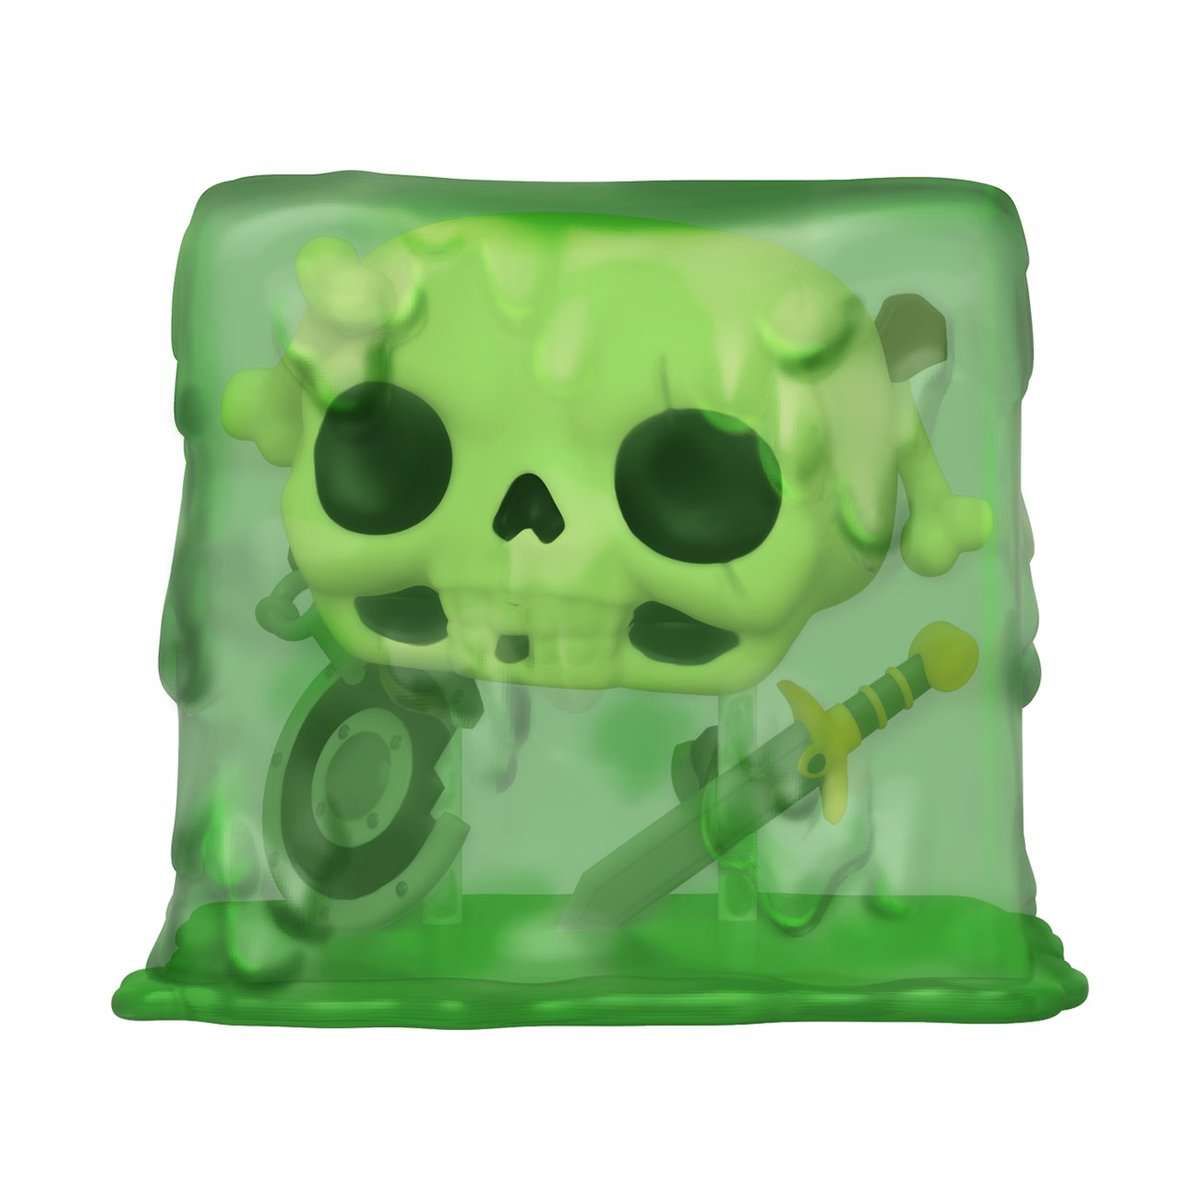 RT & follow @OriginalFunko for a chance to WIN a 2020 #ECCC exclusive Gelatinous Cube Pop!        
#Funko #FunkoPop #Giveaway #Exclusive #GelatinousCube #ECCC #2020ECCC #FunkoECCC #DungeonsandDragons